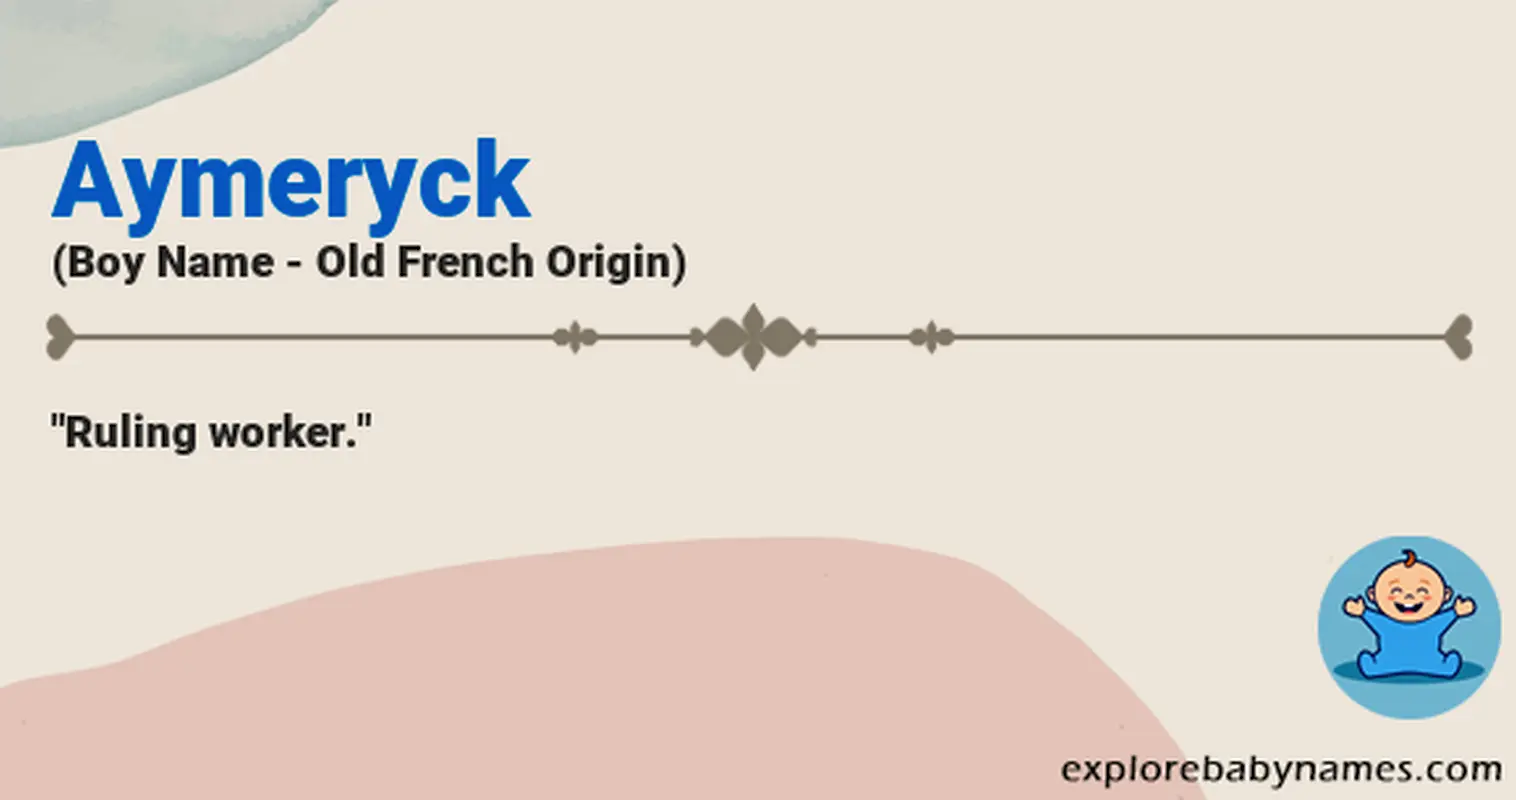 Meaning of Aymeryck